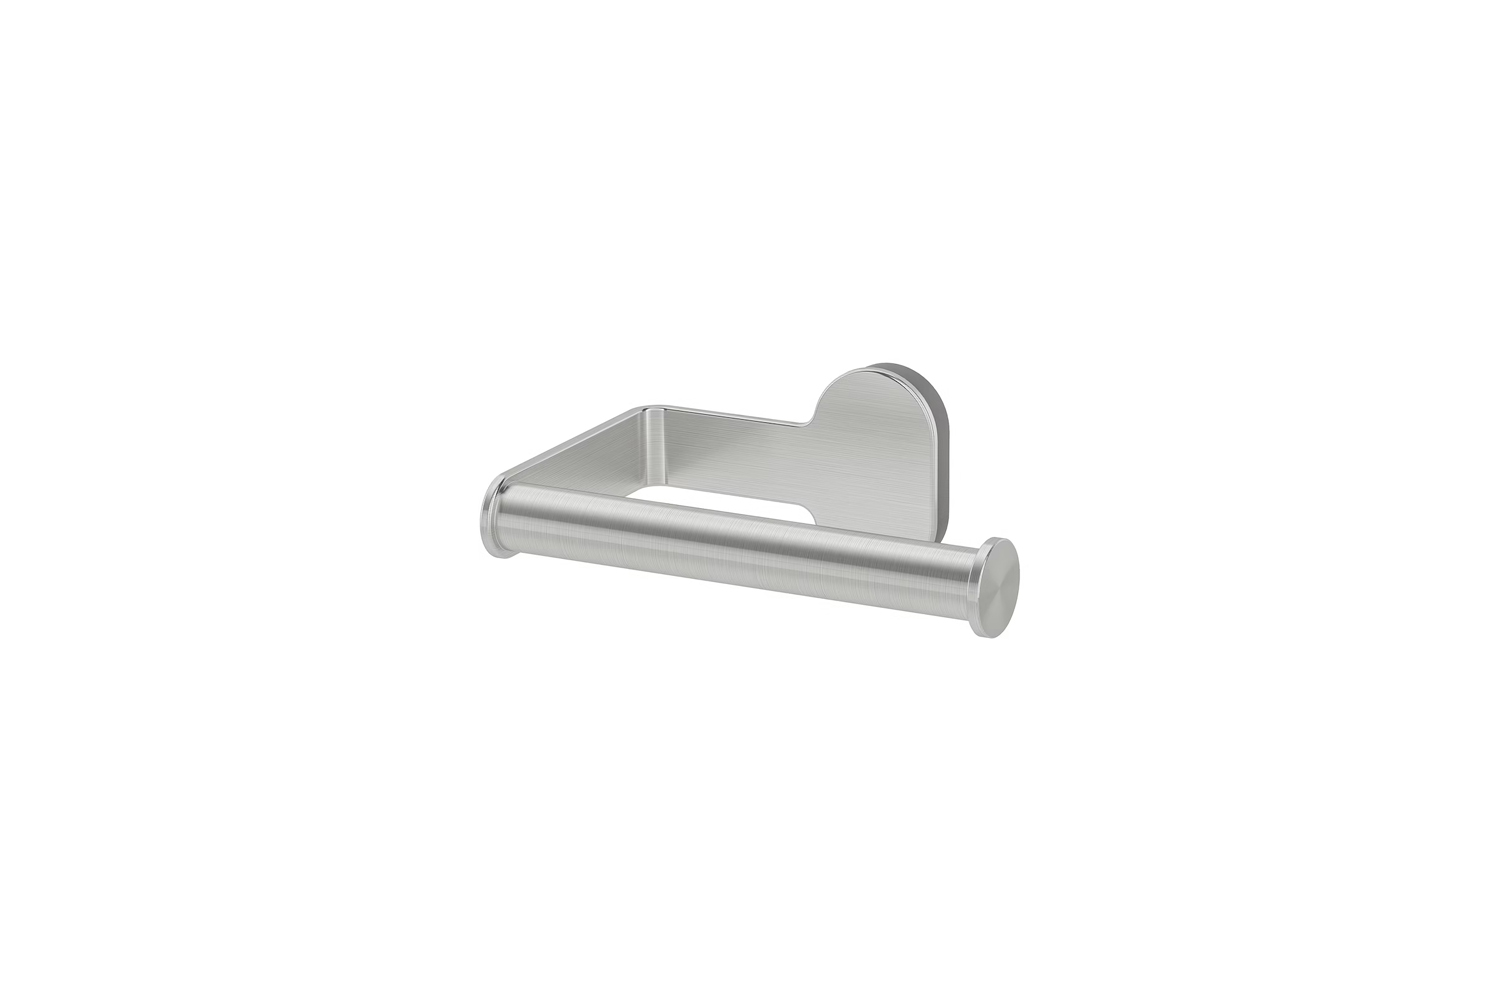 the ikea brogrund toilet roll holder in stainless steel is \$6.99. 17